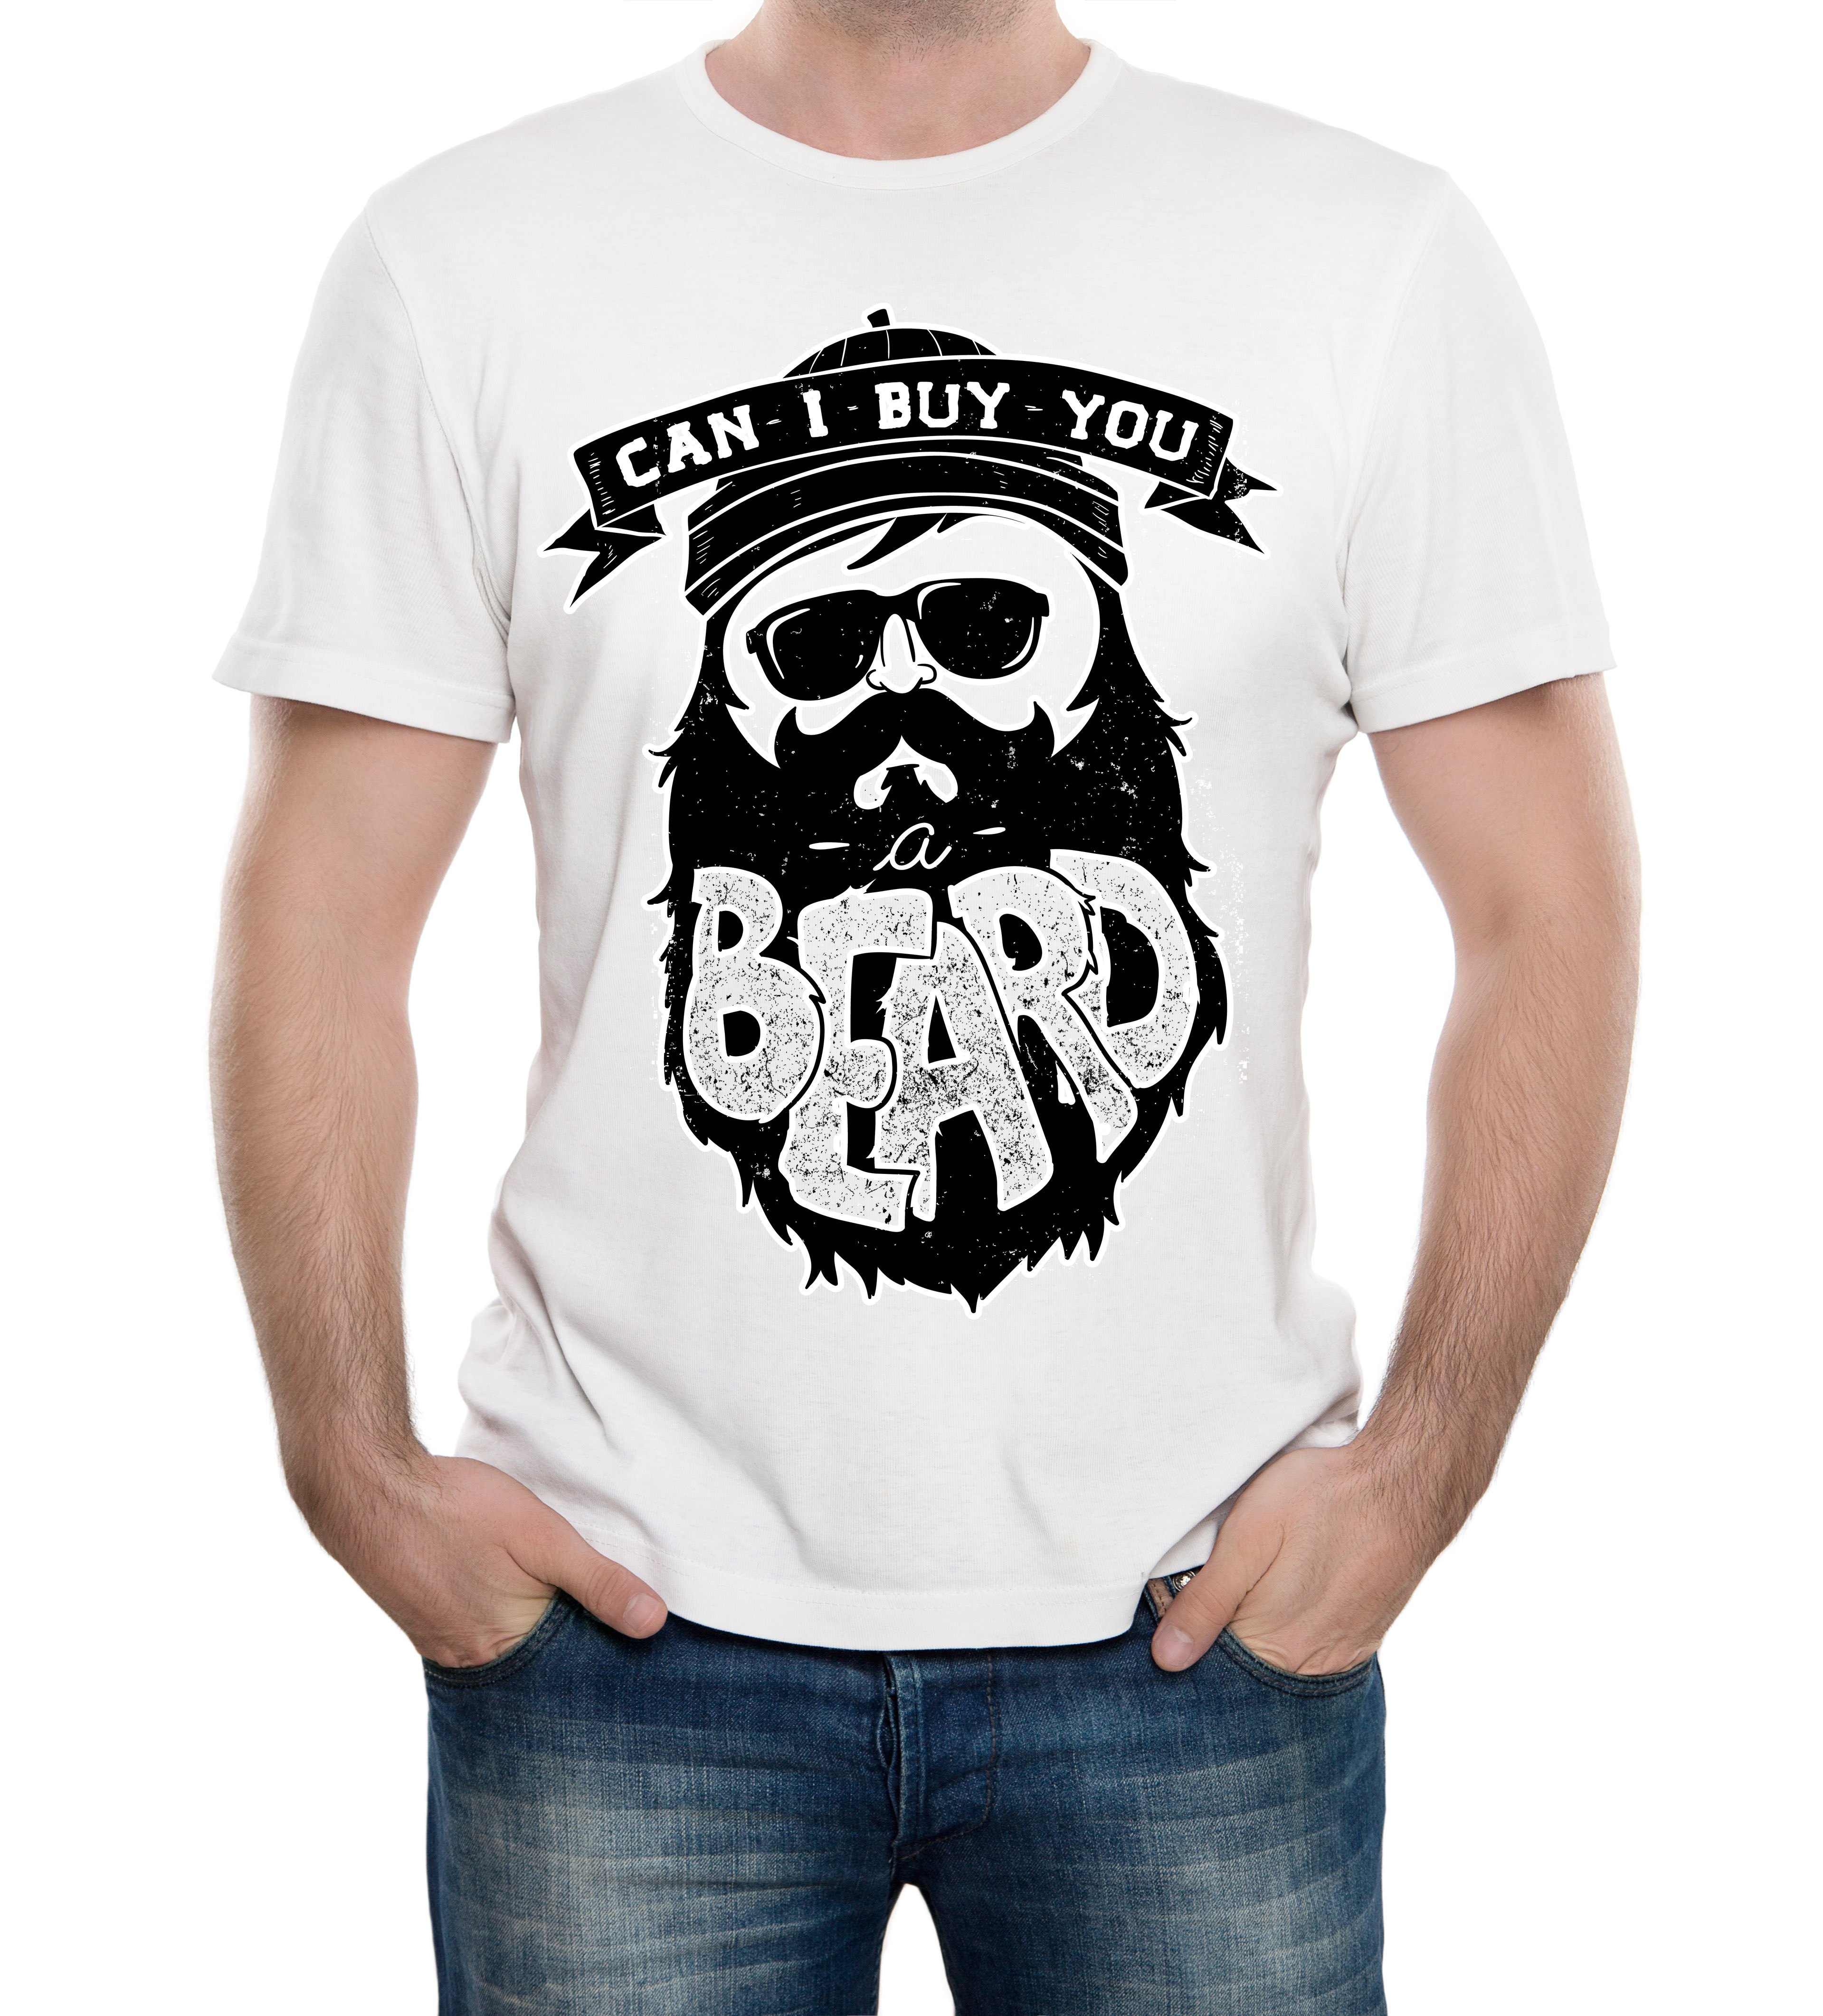 Can I Buy You A Beard - Endeavor After, LLC